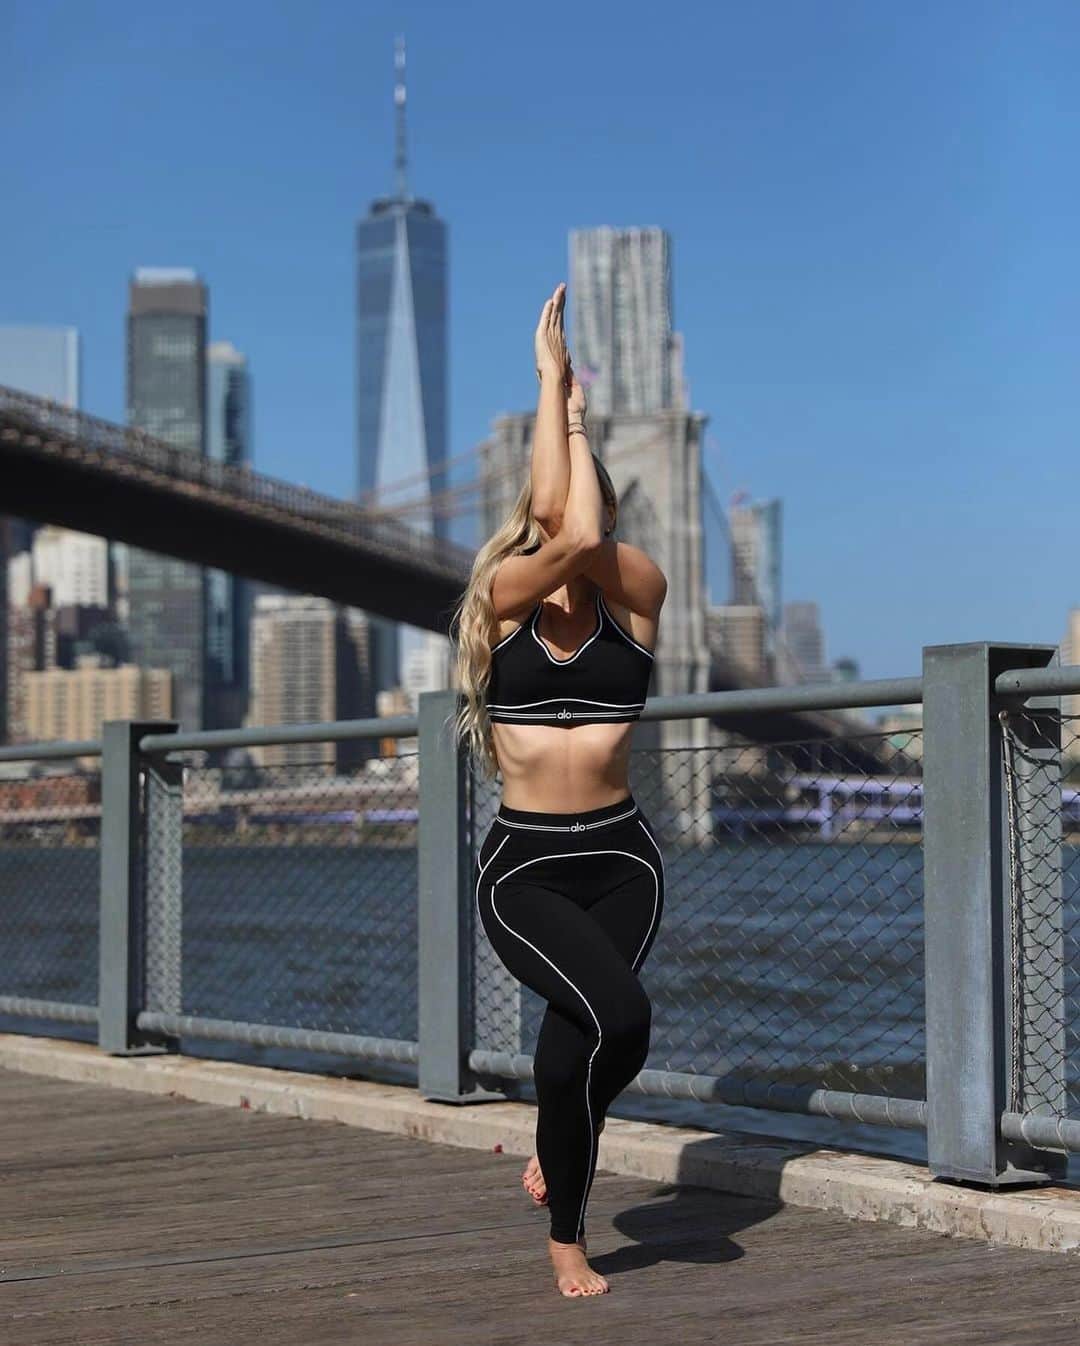 ALO Yogaのインスタグラム：「Confidence is mastered when practiced, and what you always dreamed of is on the other side of fear.” - @silkymariesky  ✨ Practice hard stuff ✨ Take action every single day toward what scares you ✨ Don’t listen to the fearful voice ✨ Jump in」